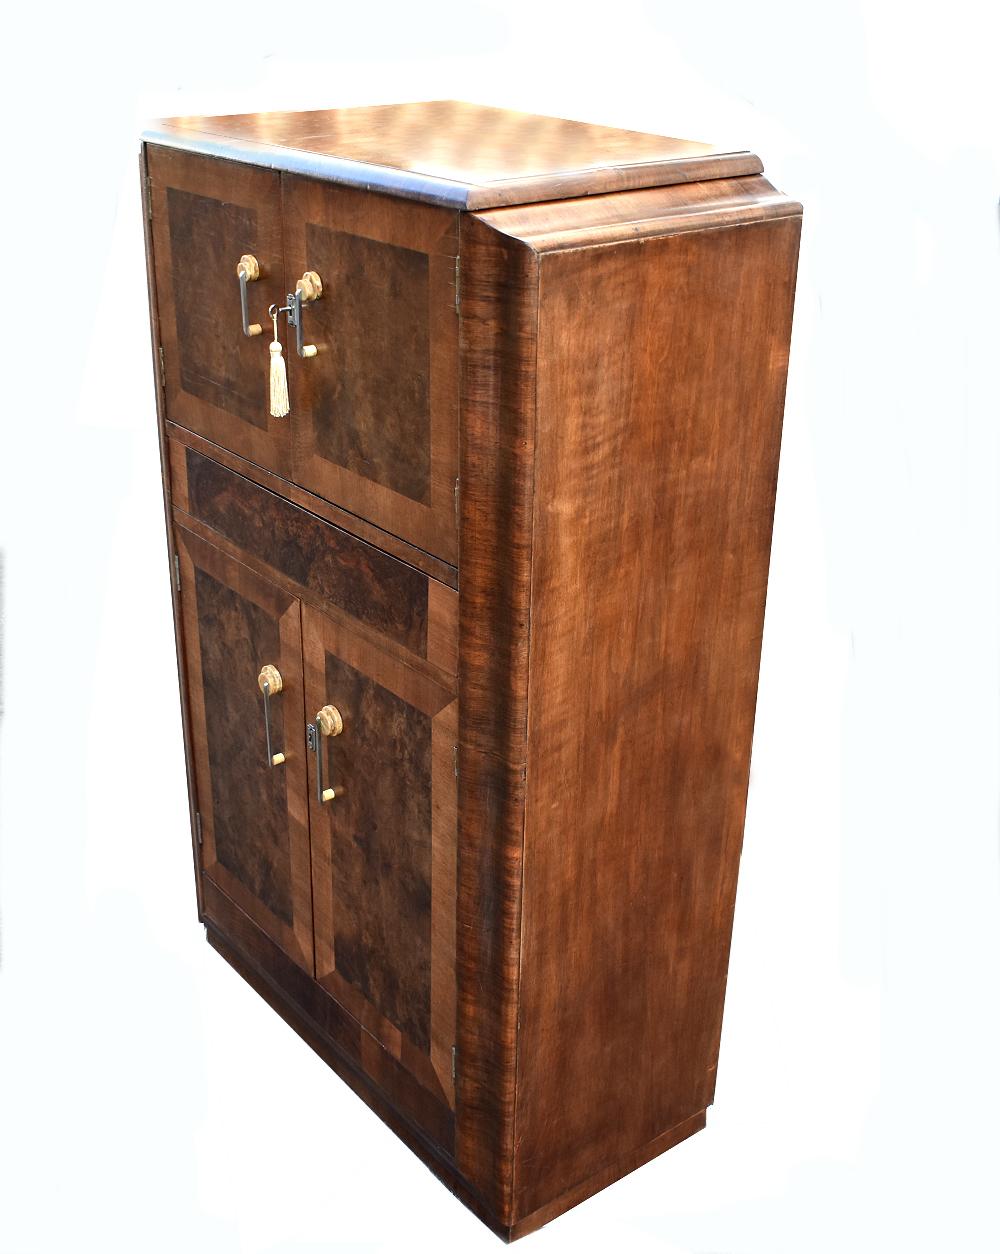 English Art Deco Fitted Burr Walnut Cocktail Cabinet or Dry Bar (Art déco)